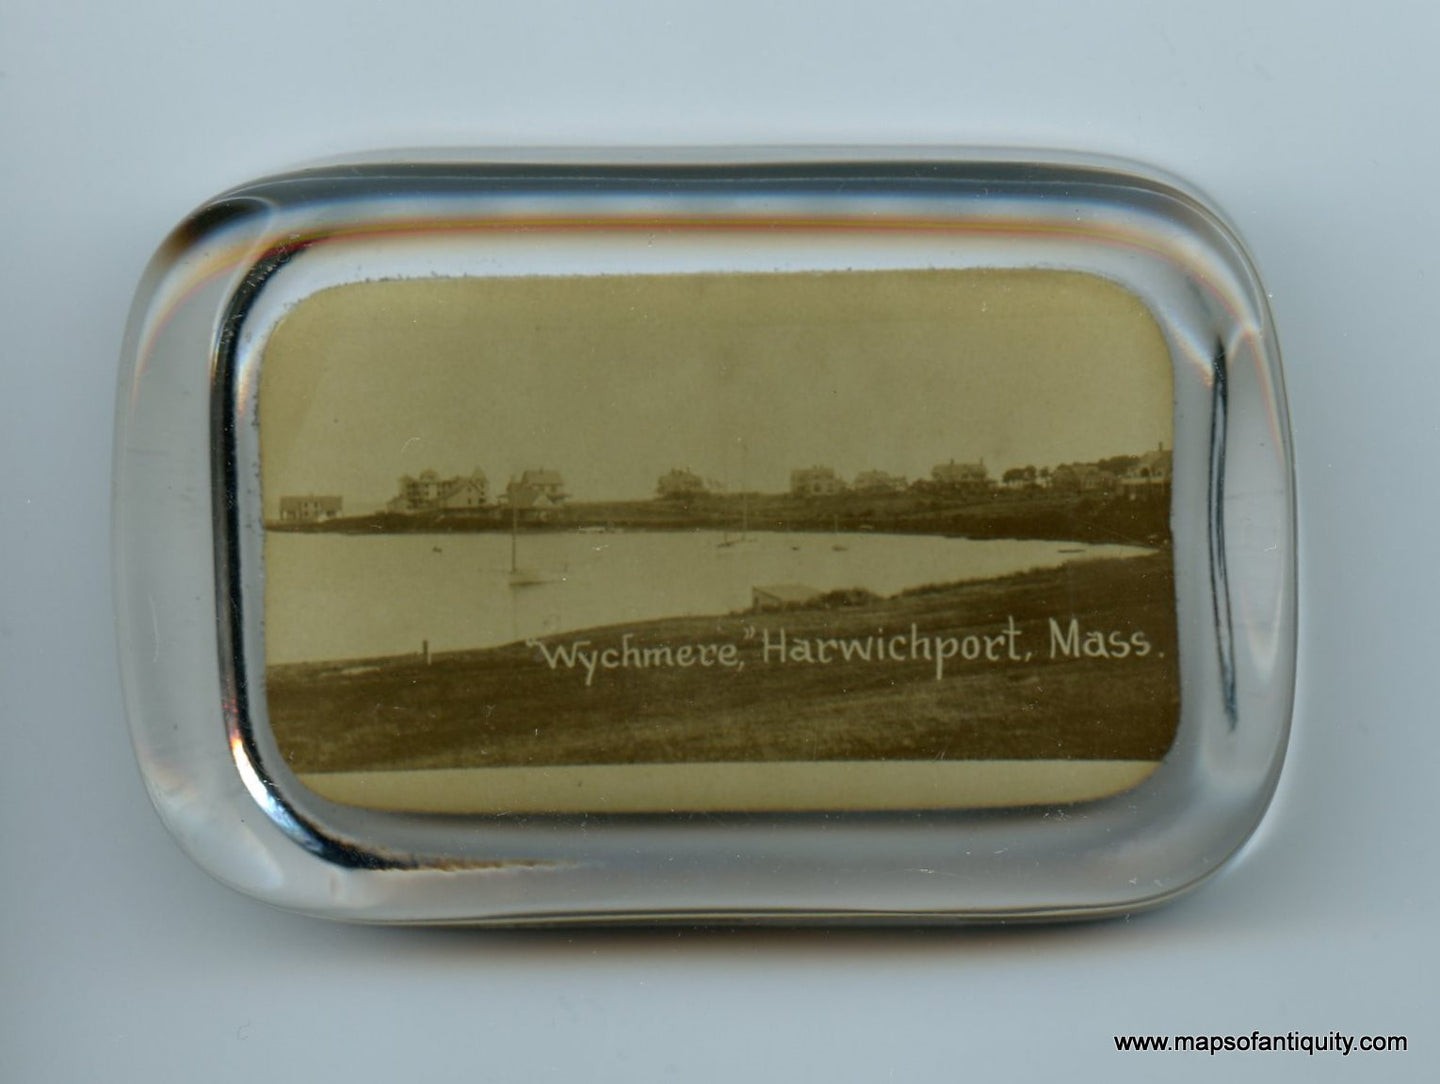 Antique-Misc.-Wychmere-Harwichport-Mass.-Paperweight-********-Other-Cape-Cod-and-Islands-1910--Maps-Of-Antiquity